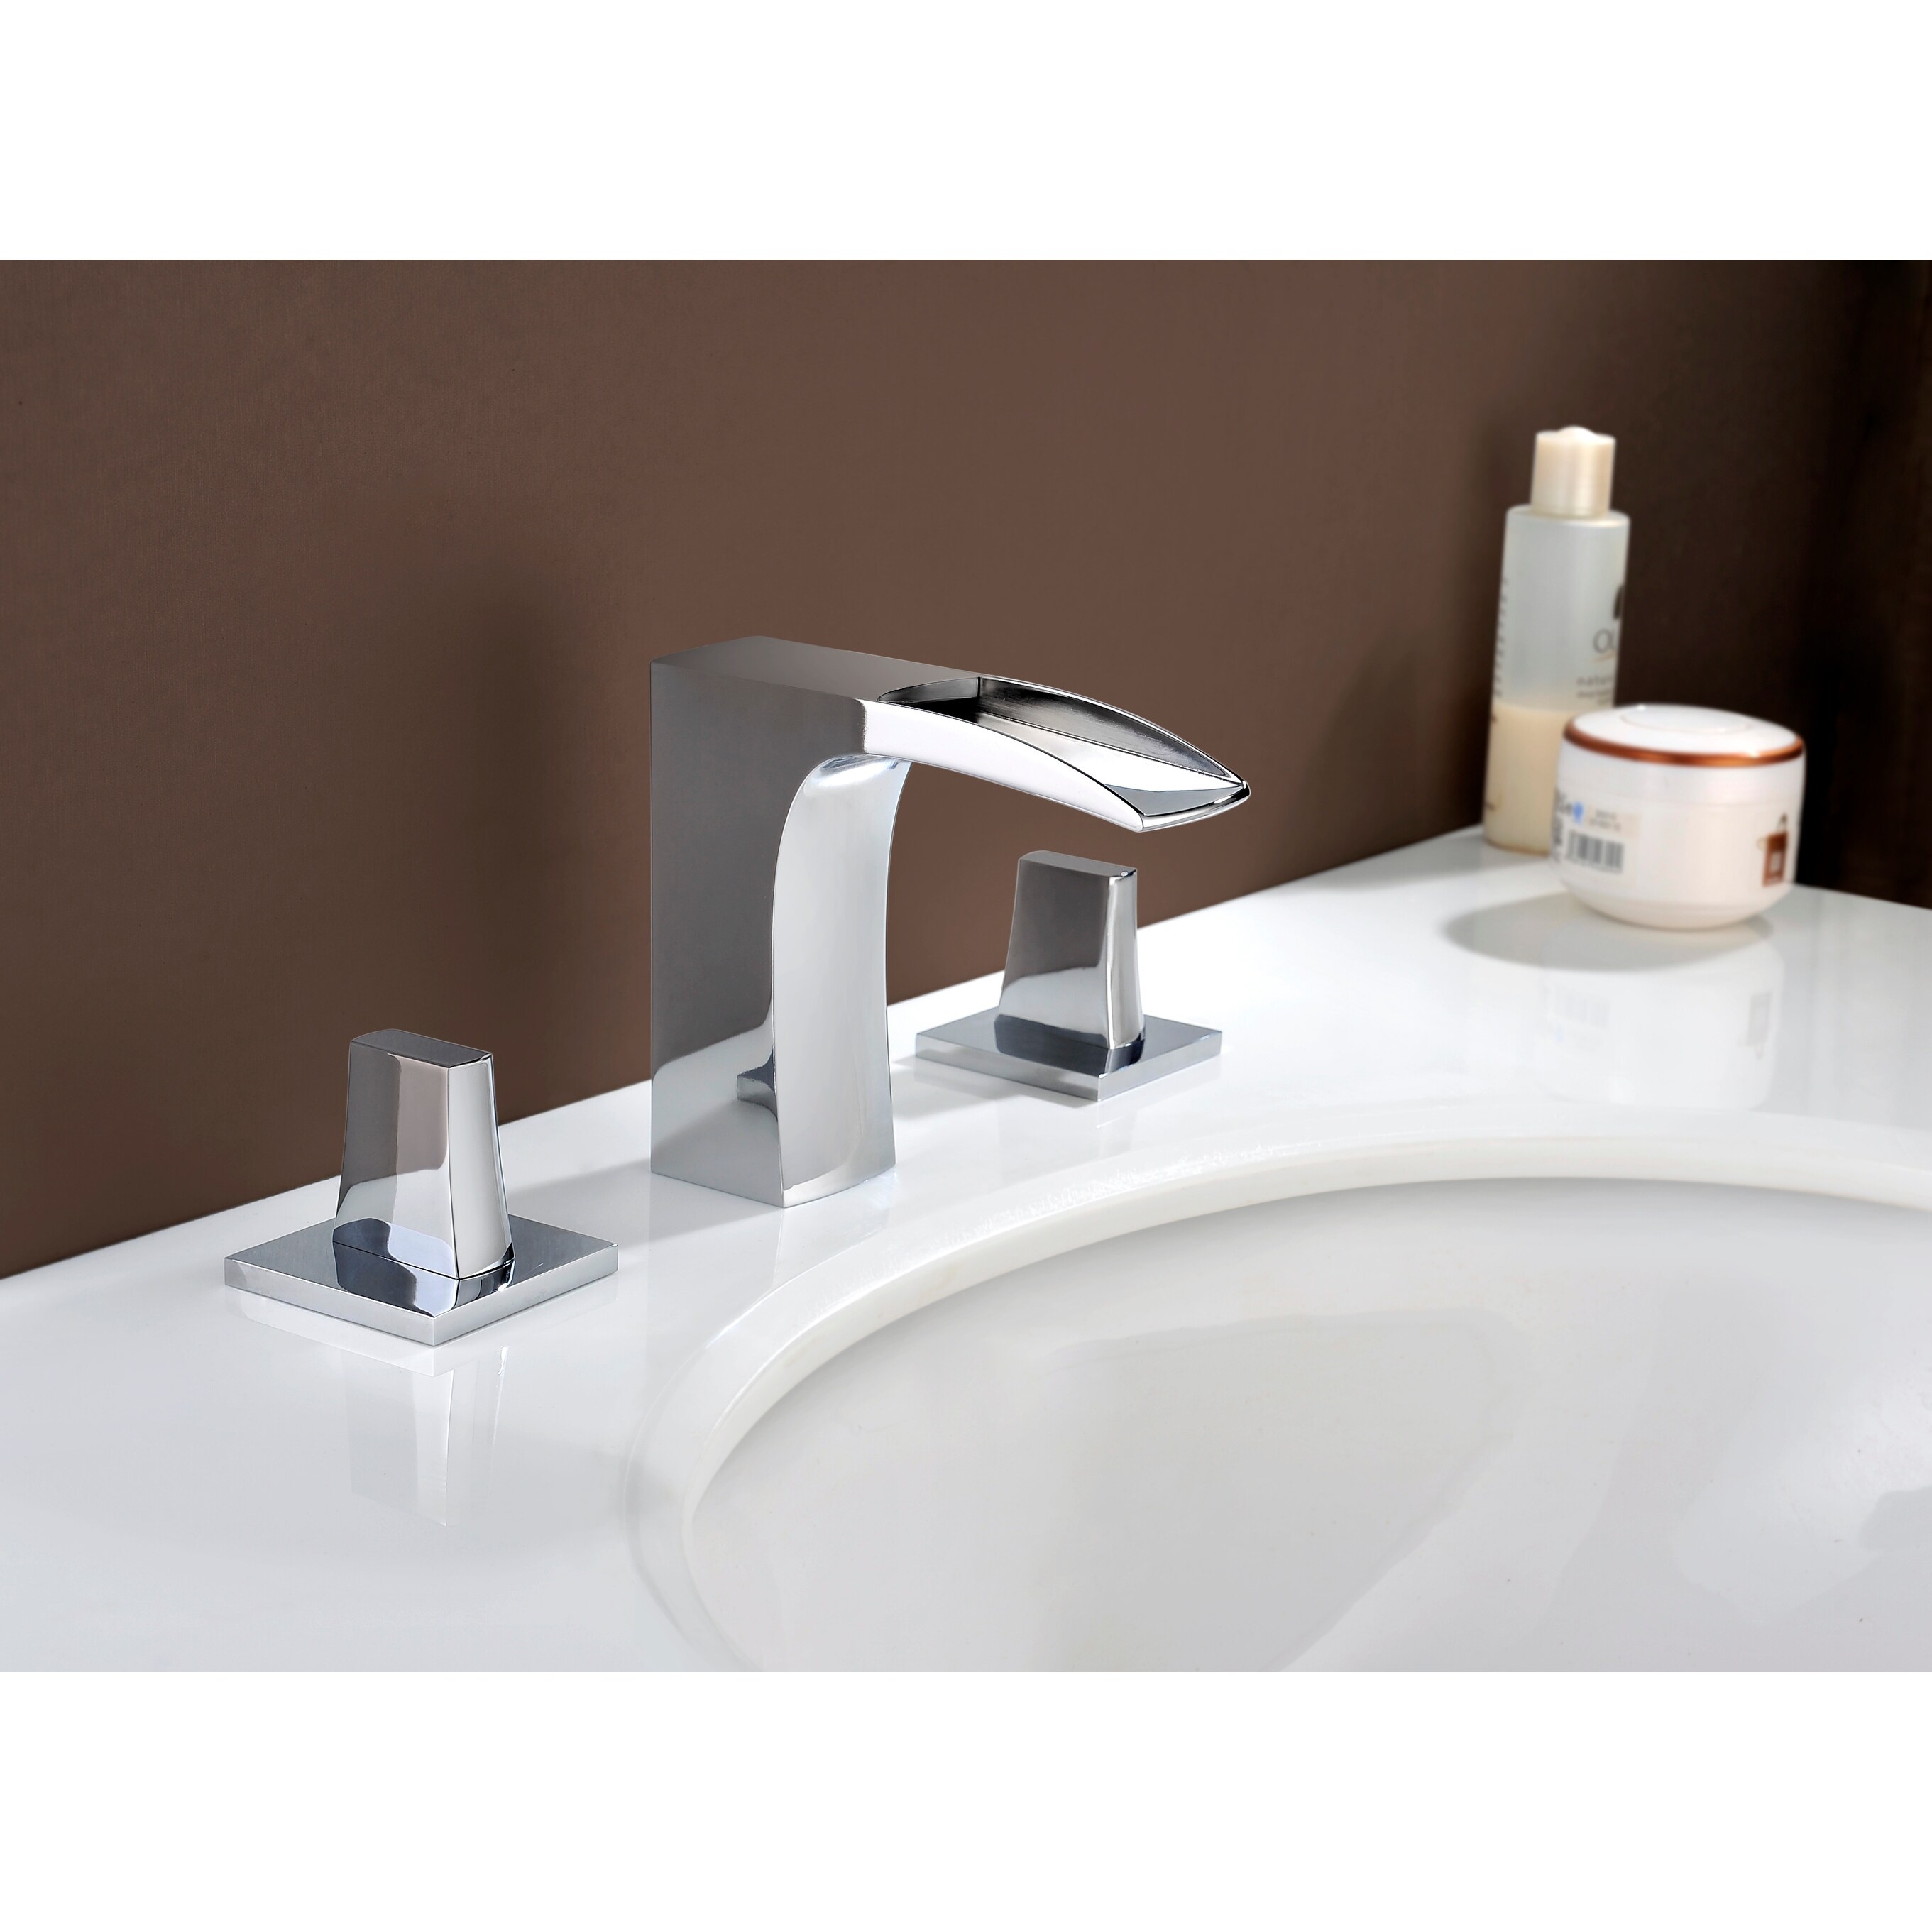 20.75-in. W Rectangle Undermount Sink Set In Biscuit - Chrome Hardware With 3H8-in. CUPC Faucet